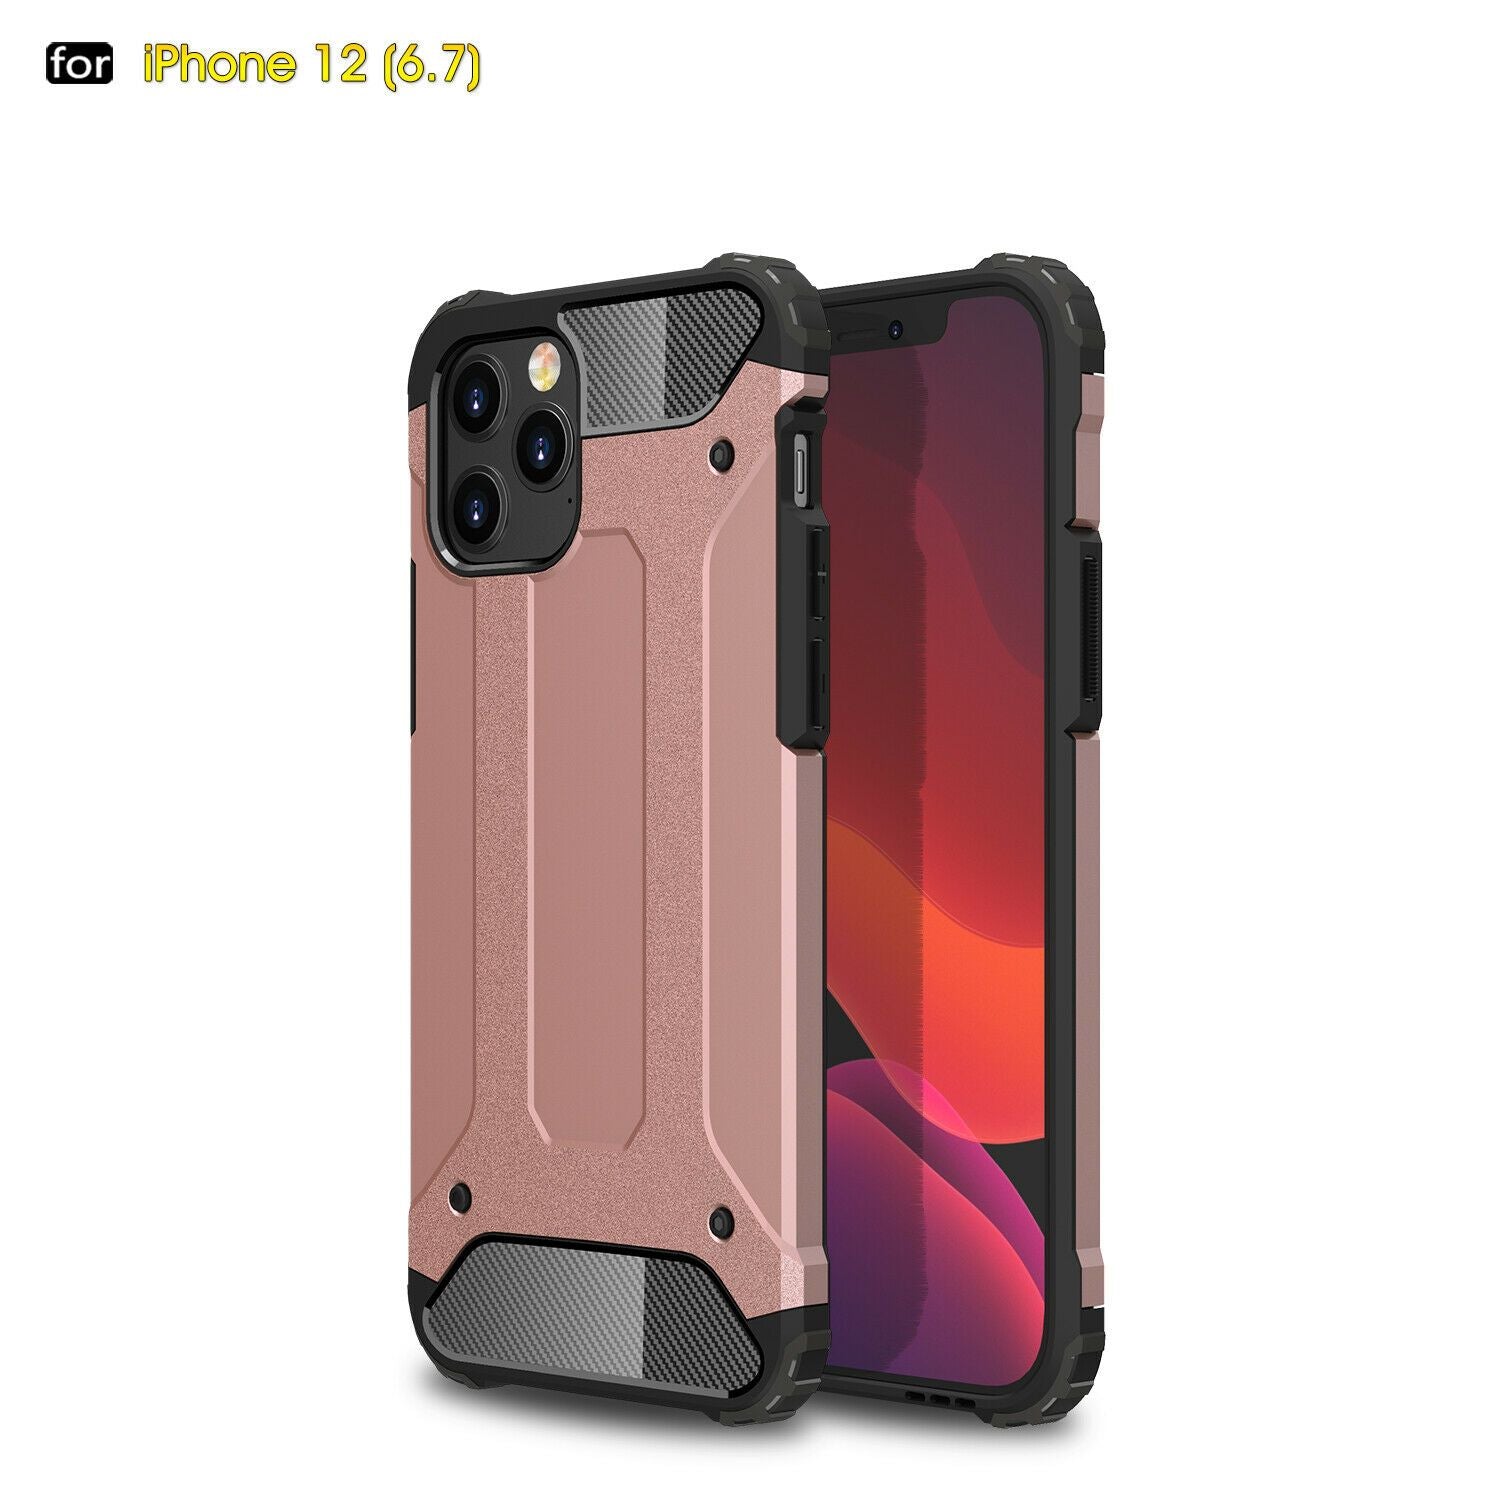 Luxury Armor Rugged Shockproof Case For iPhone